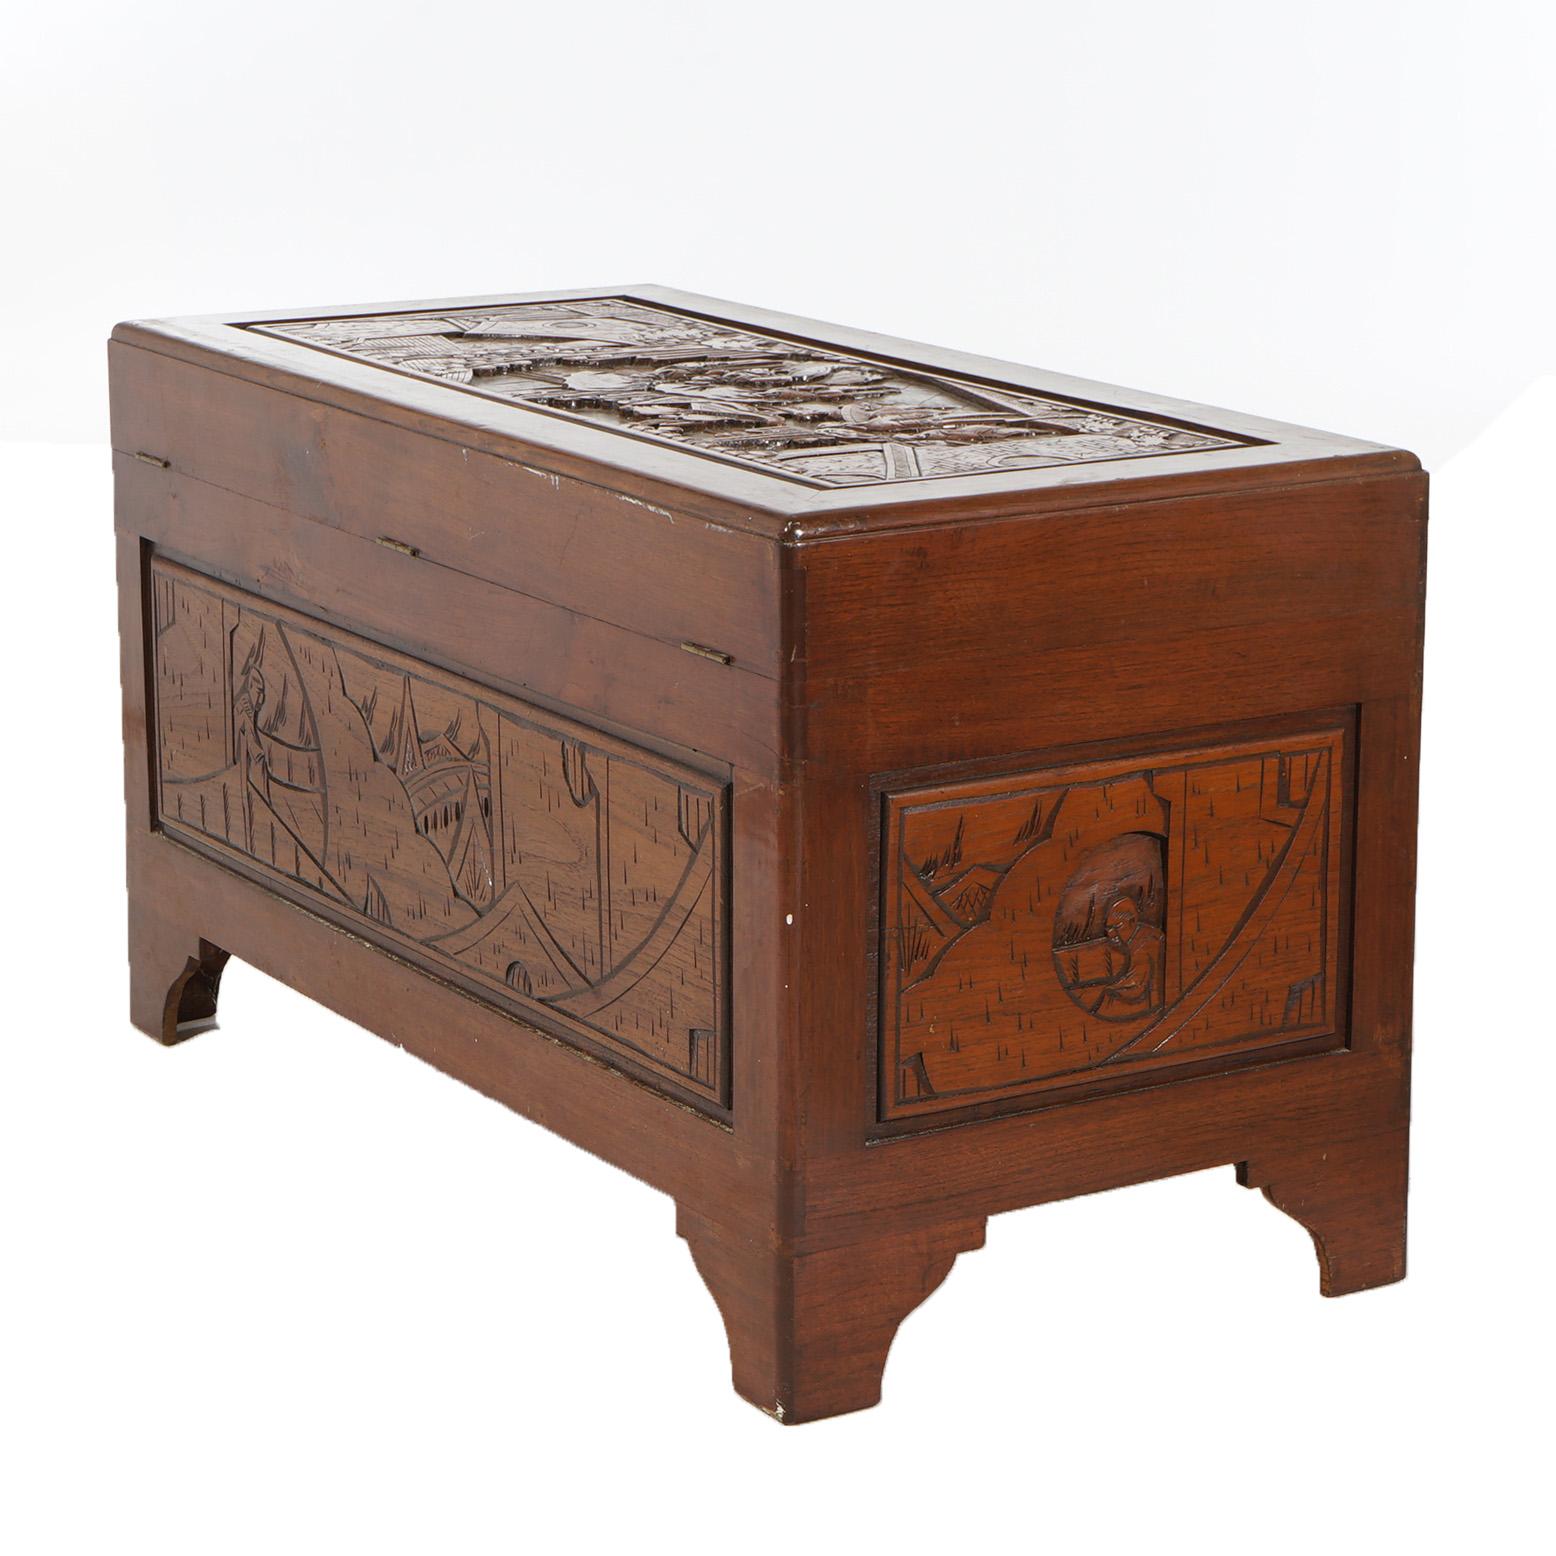 Chinese Carved Hardwood Figural Blanket Chest with Street Scene in Relief 20thC For Sale 7